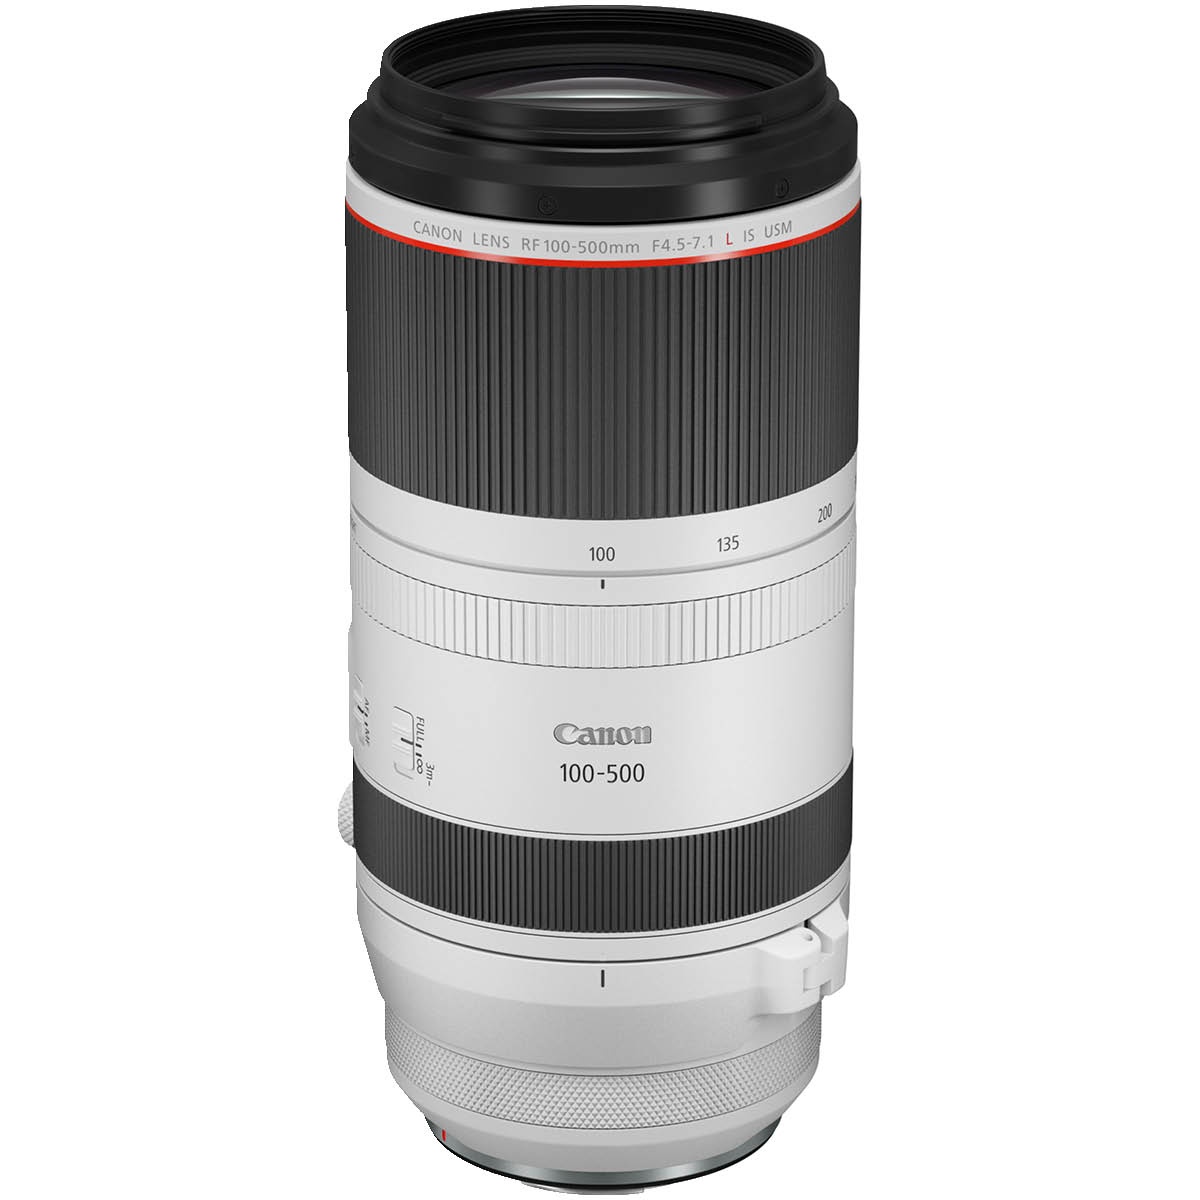 Canon RF 100-500 mm 1: 4.5-7.1 L IS USM